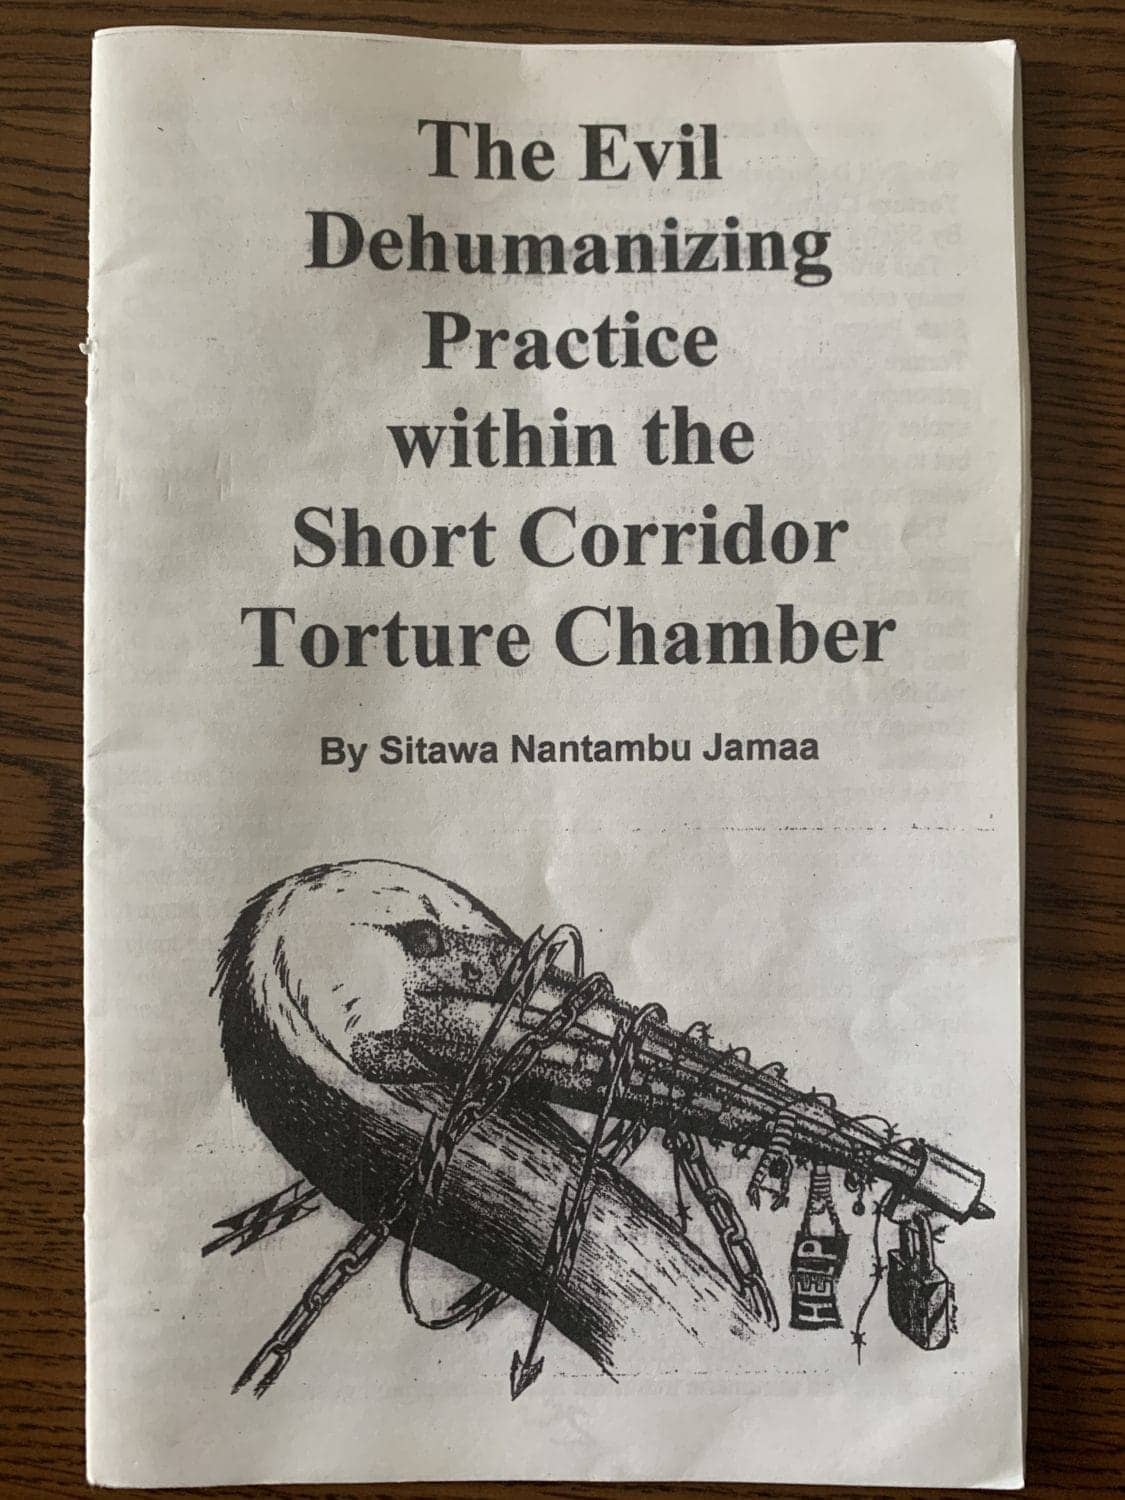 The-Evil-Dehumanizing-Practice-Within-the-Short-Corridor-Torture-Chamber-by-Sitawa-and-Mutope-booklet-cover, Liberate the Caged Voices, Behind Enemy Lines 